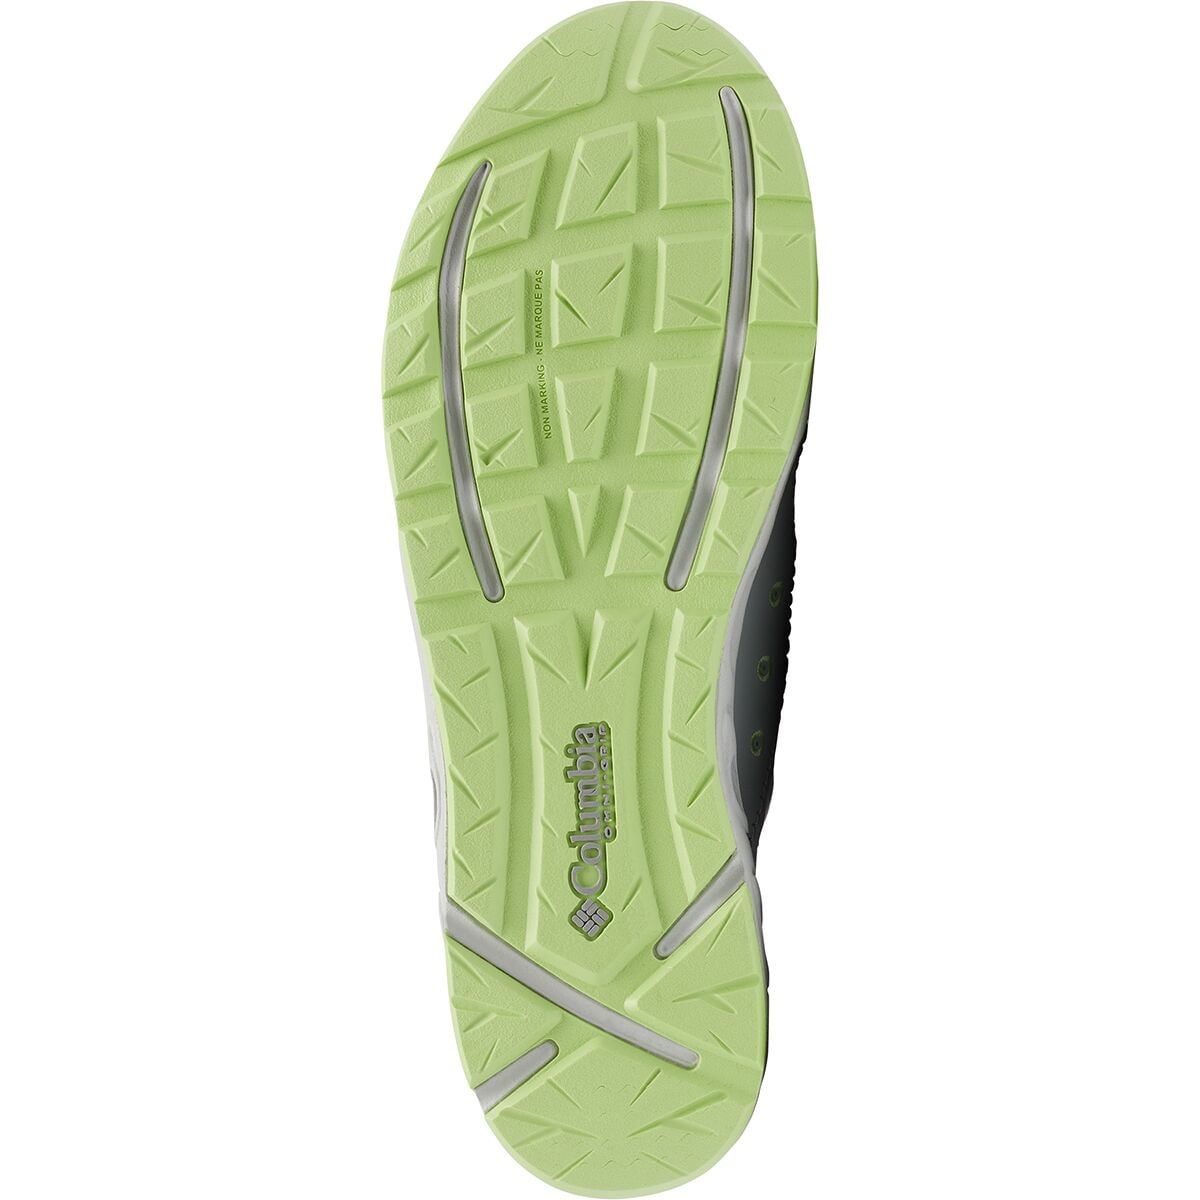 Mens Saucony Fastwitch 9 Racing Shoe